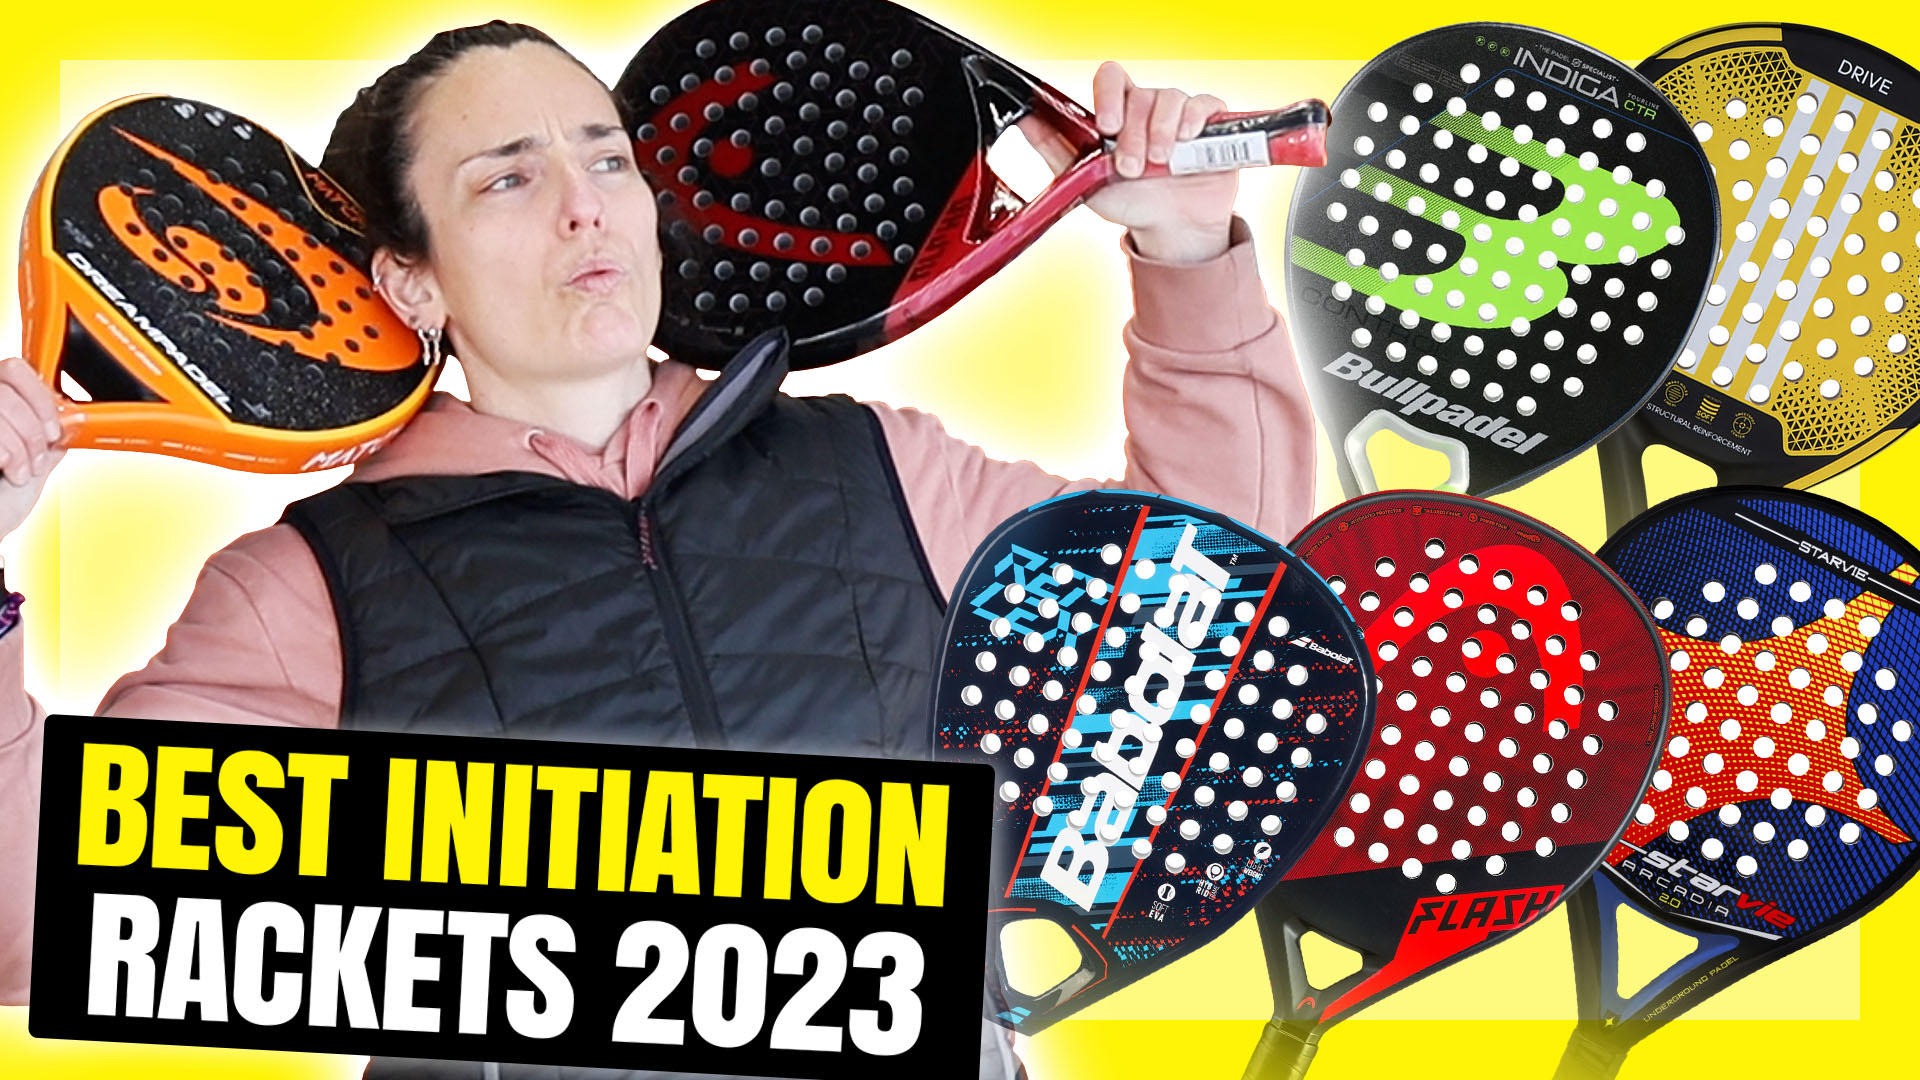 Best initiation padel rackets of 2023, the best for beginners